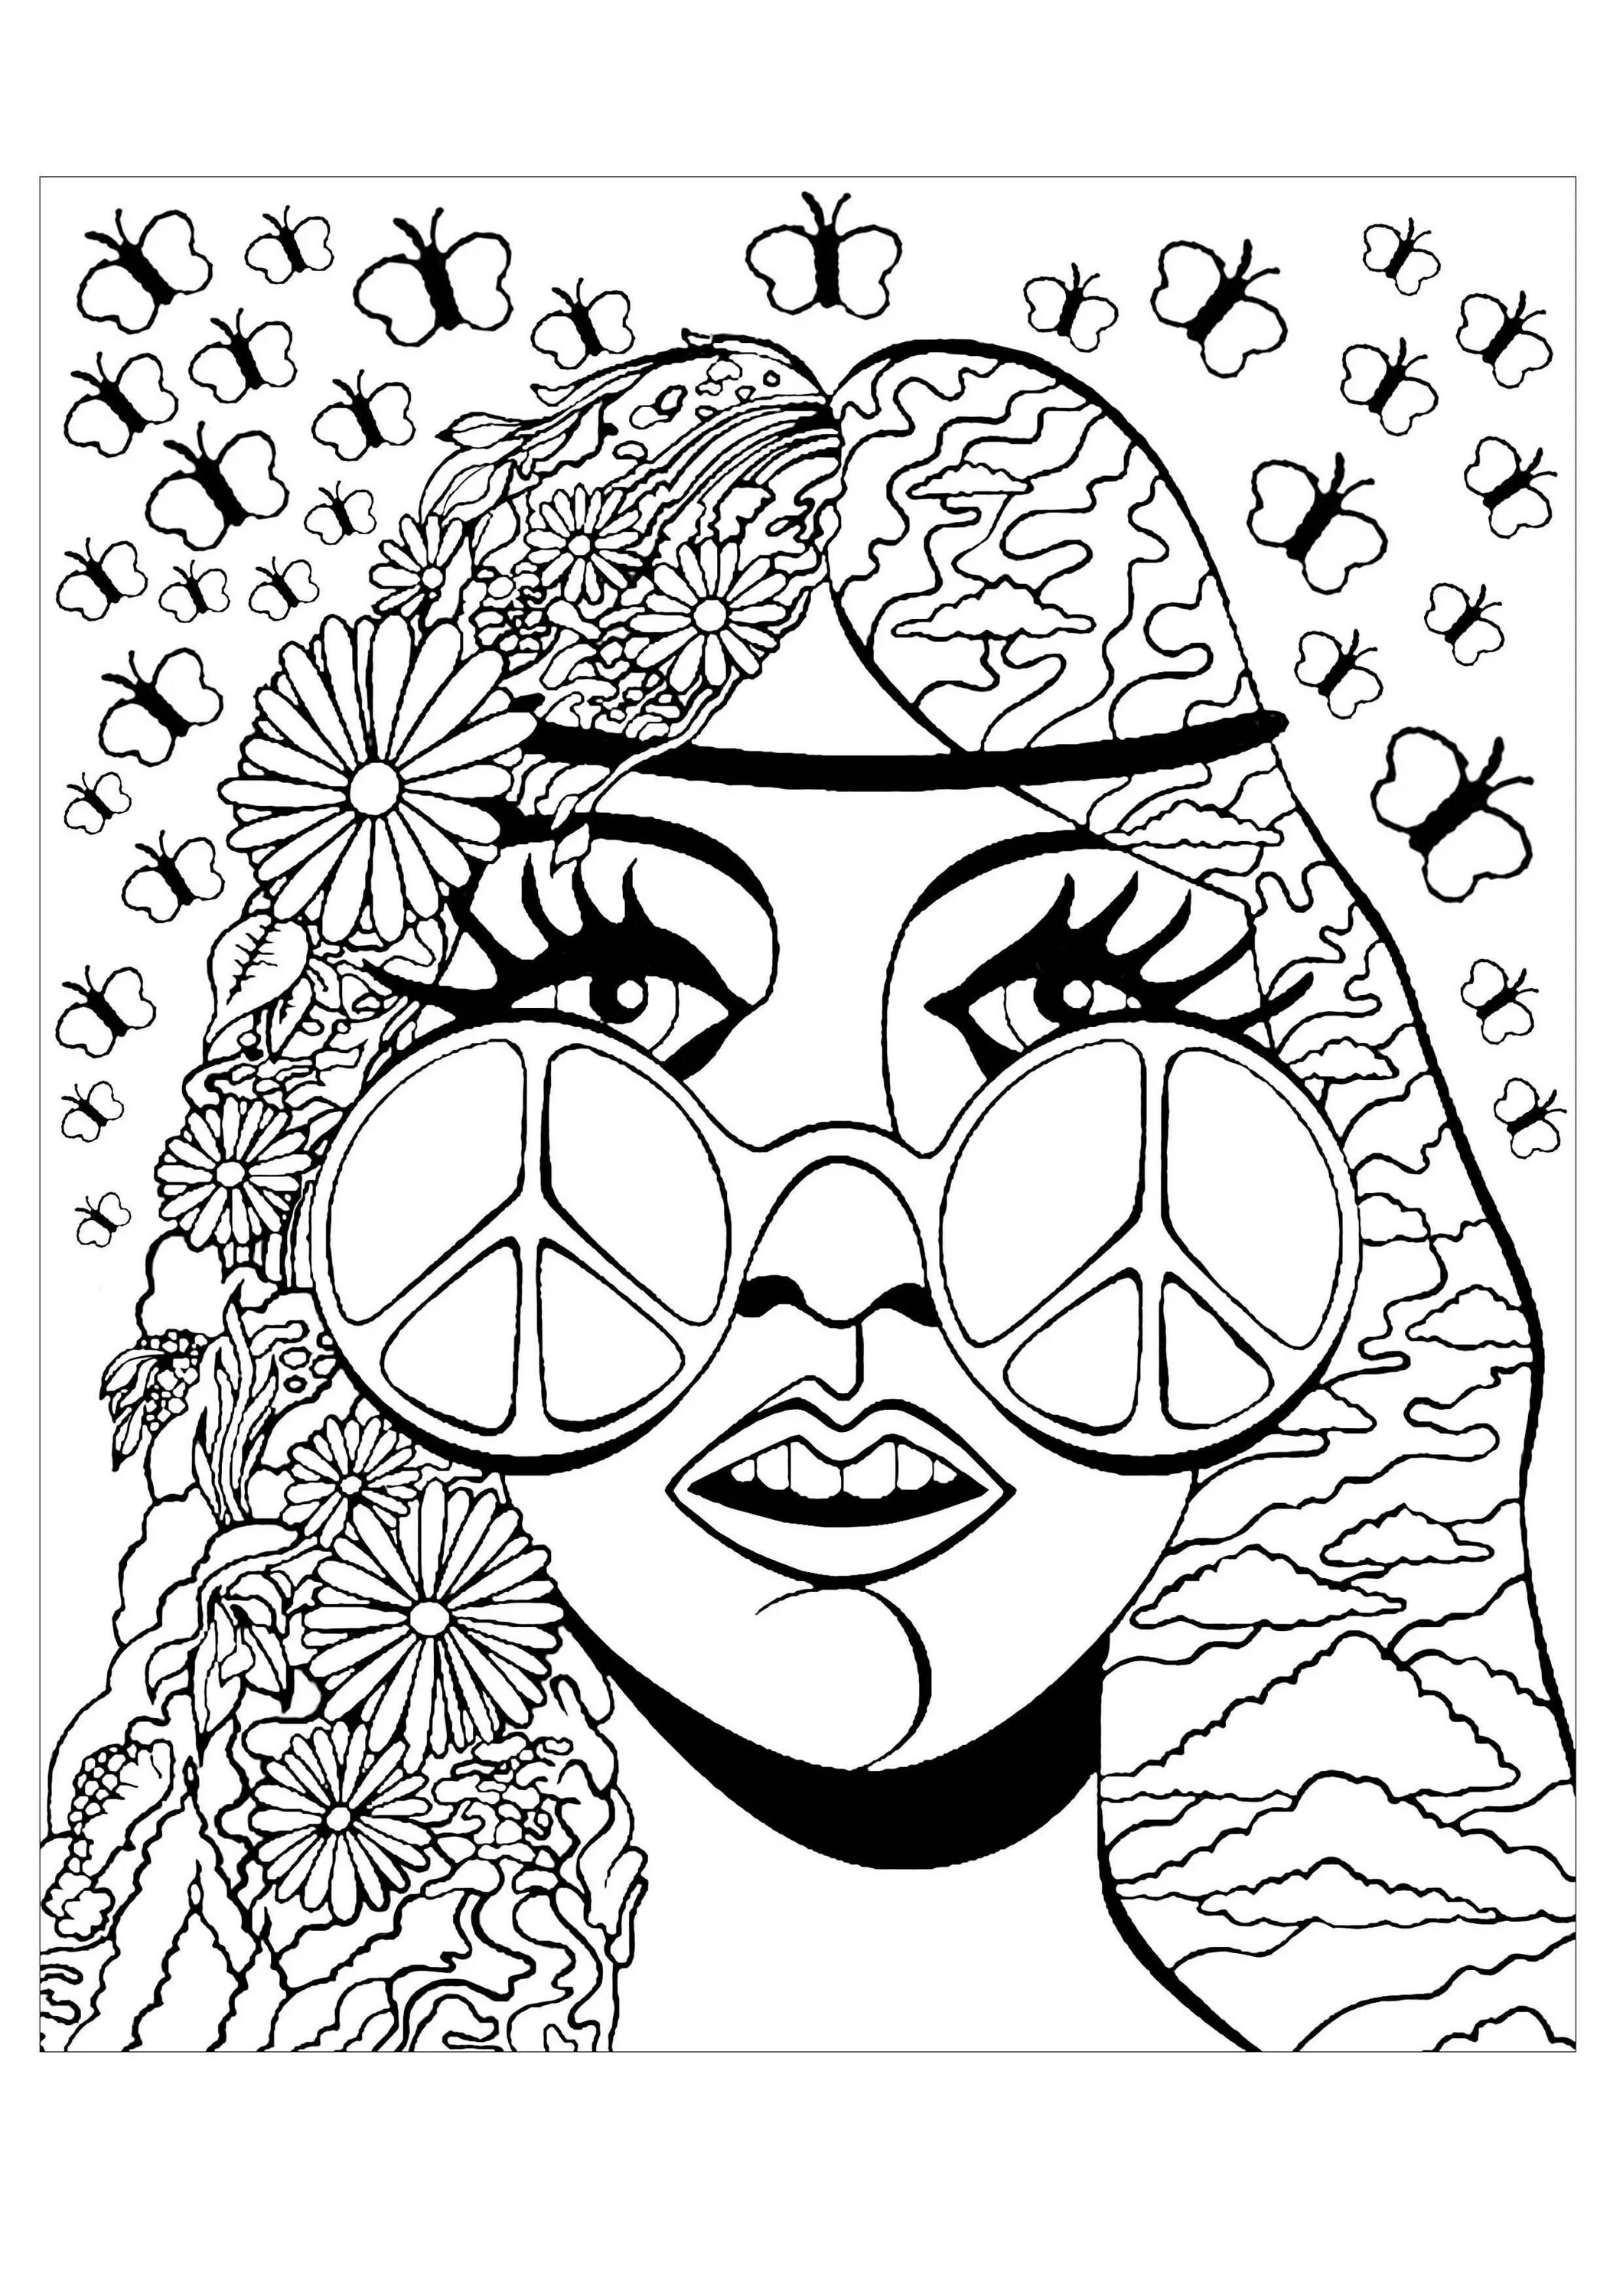 Ecstatic hippie coloring page